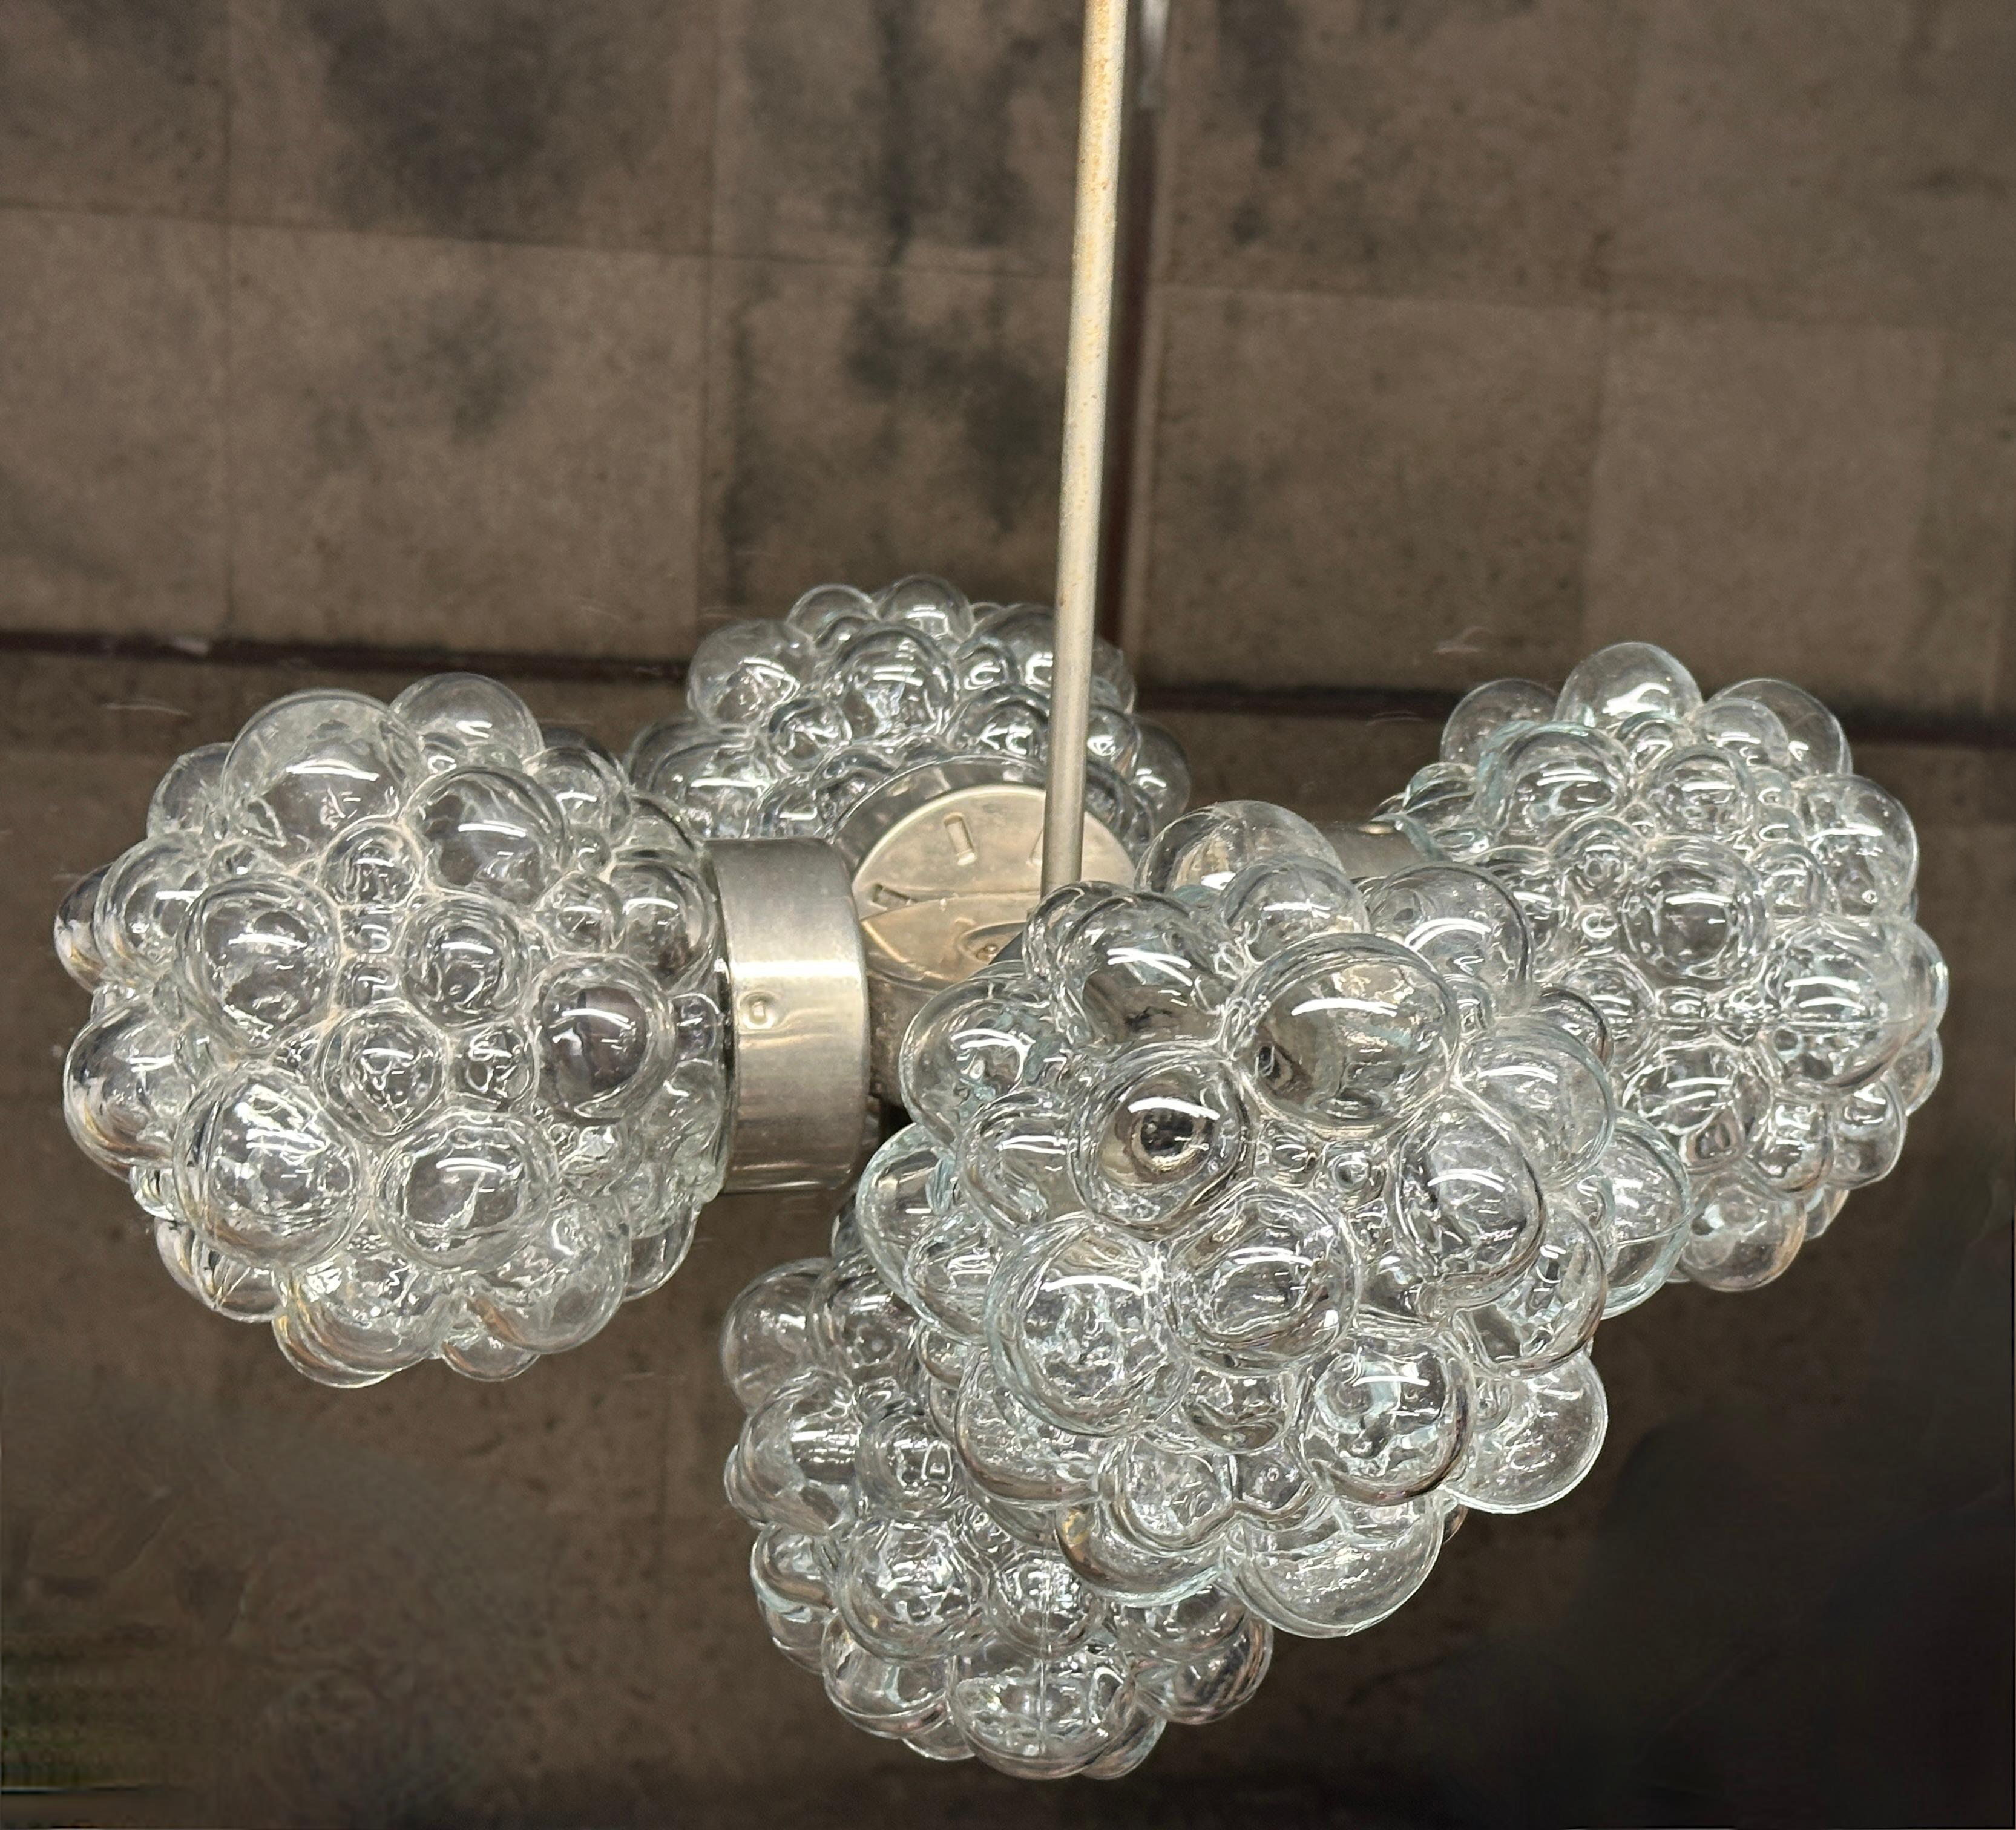 5 Light Bubble Glass Helena Tynell Style Chandelier, Austria 1960s For Sale 5